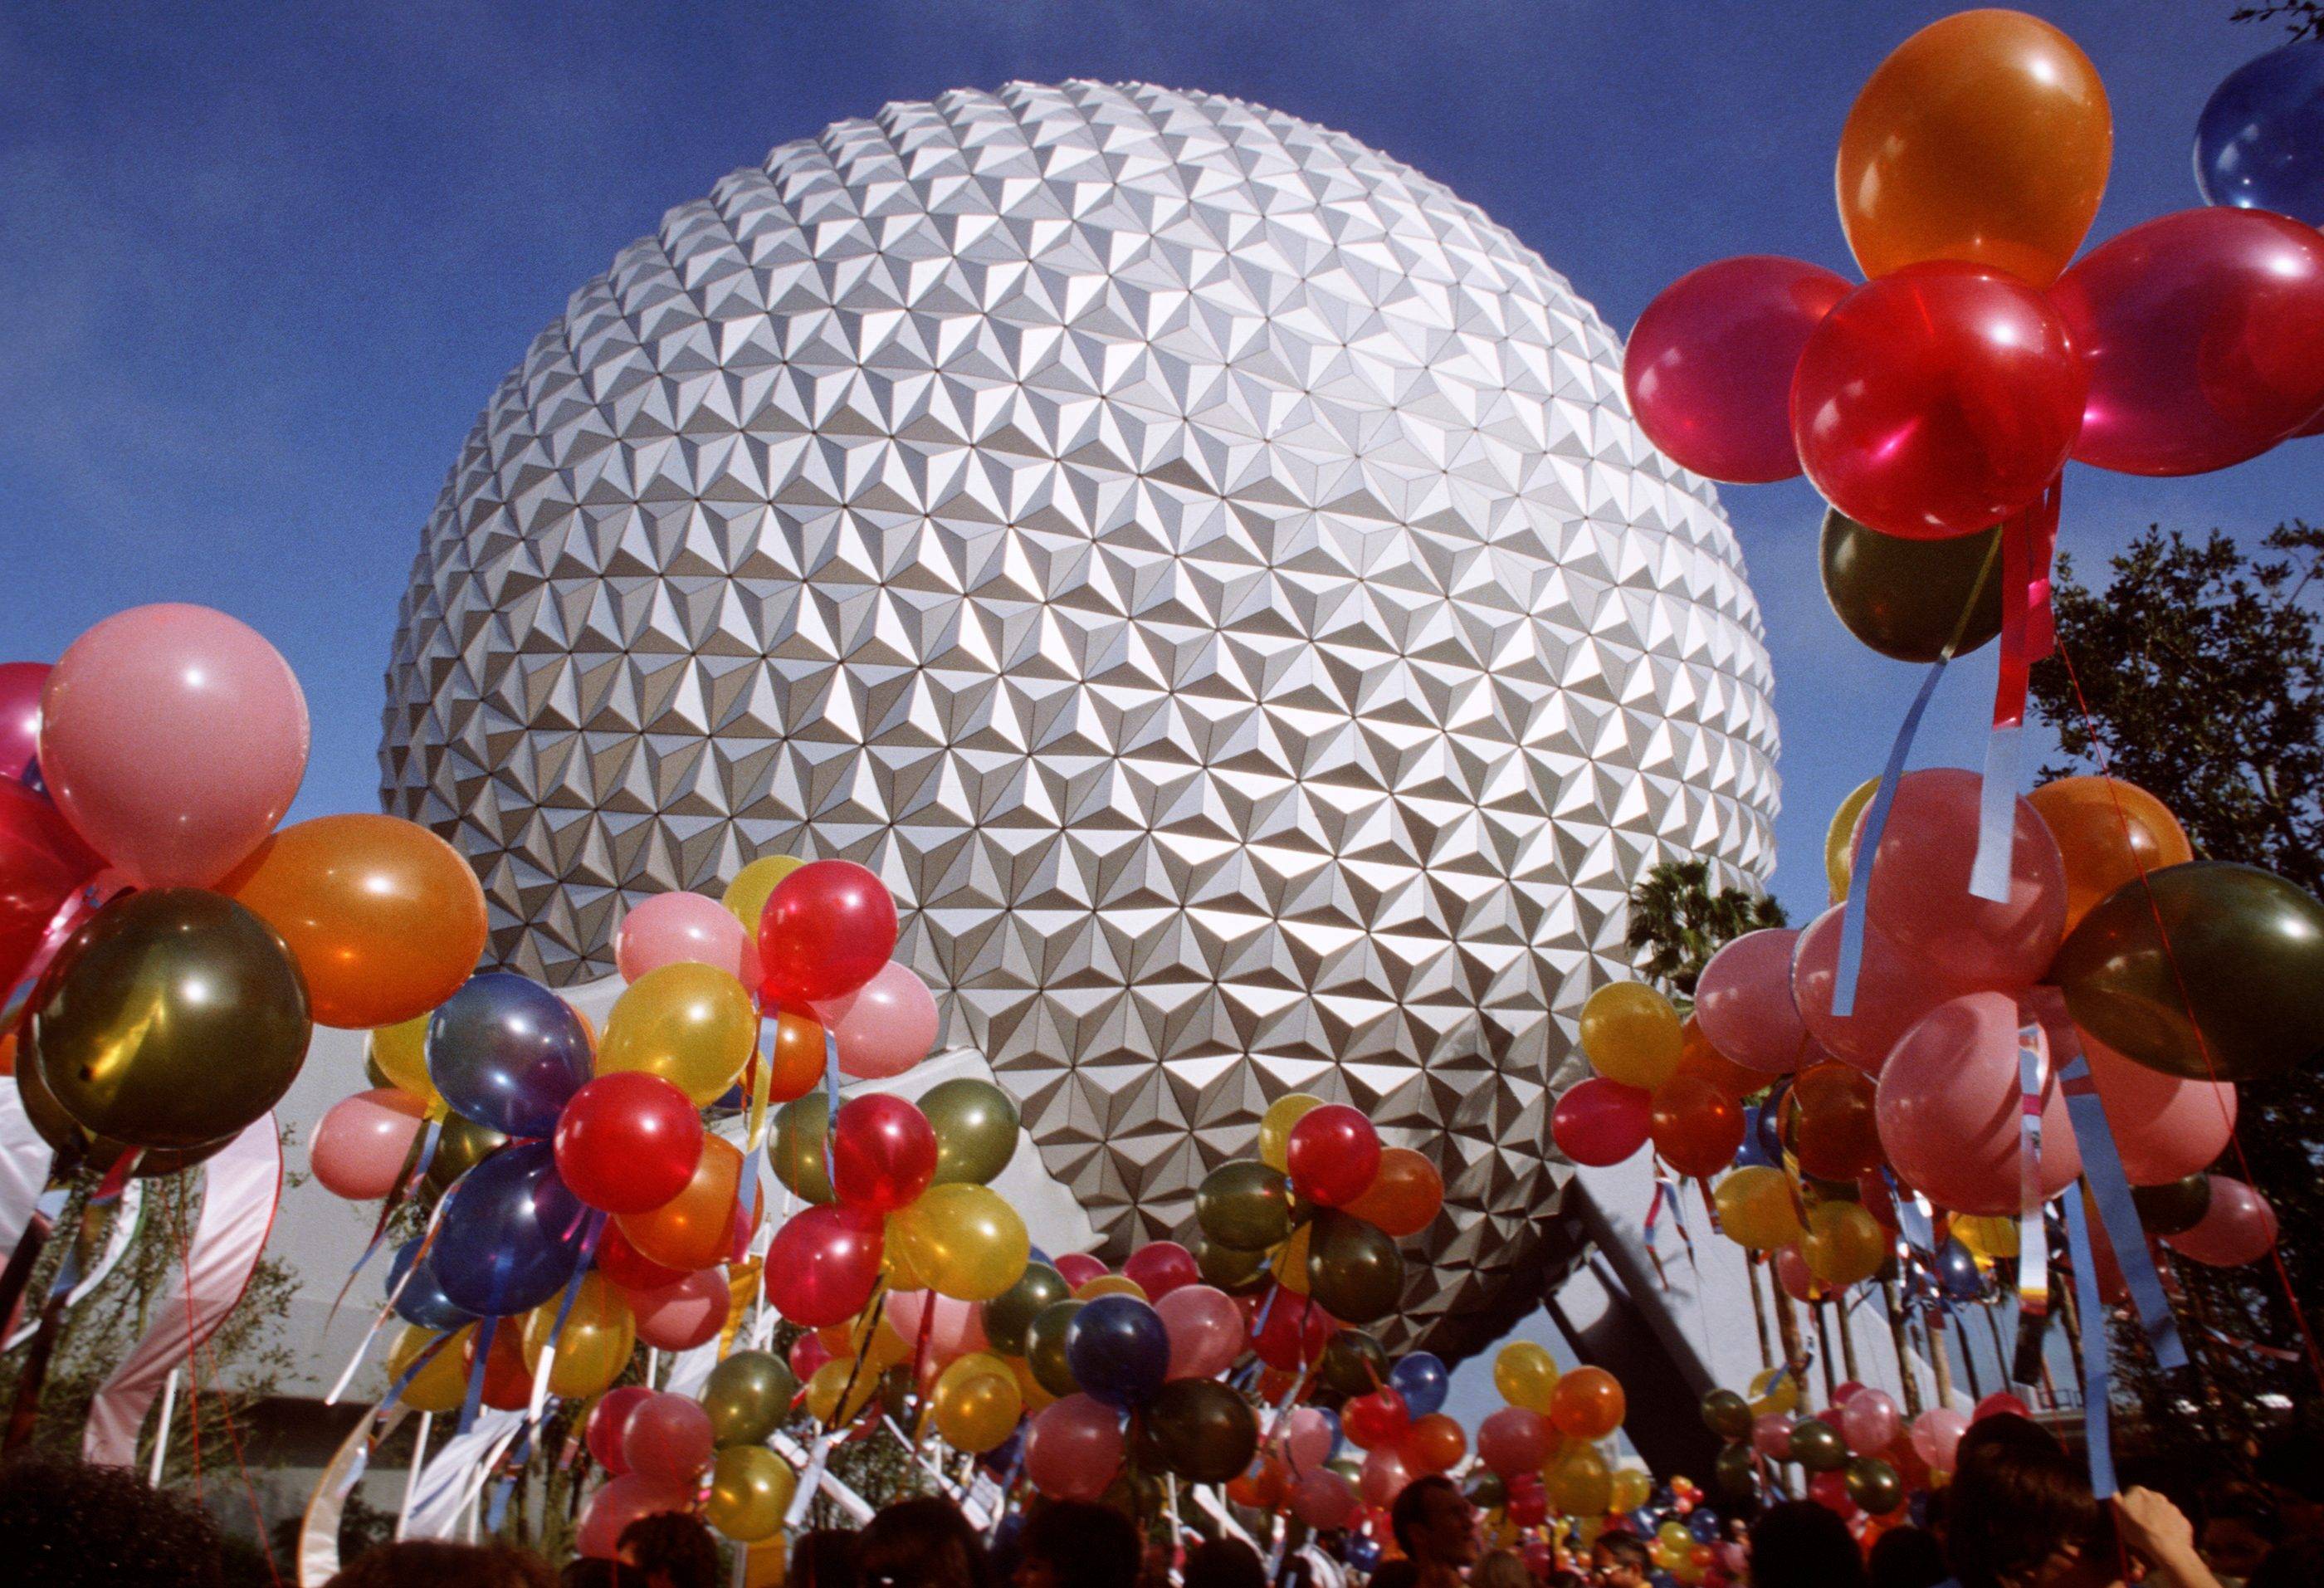 On Oct. 1, 1982, EPCOT officially opened at Walt Disney World